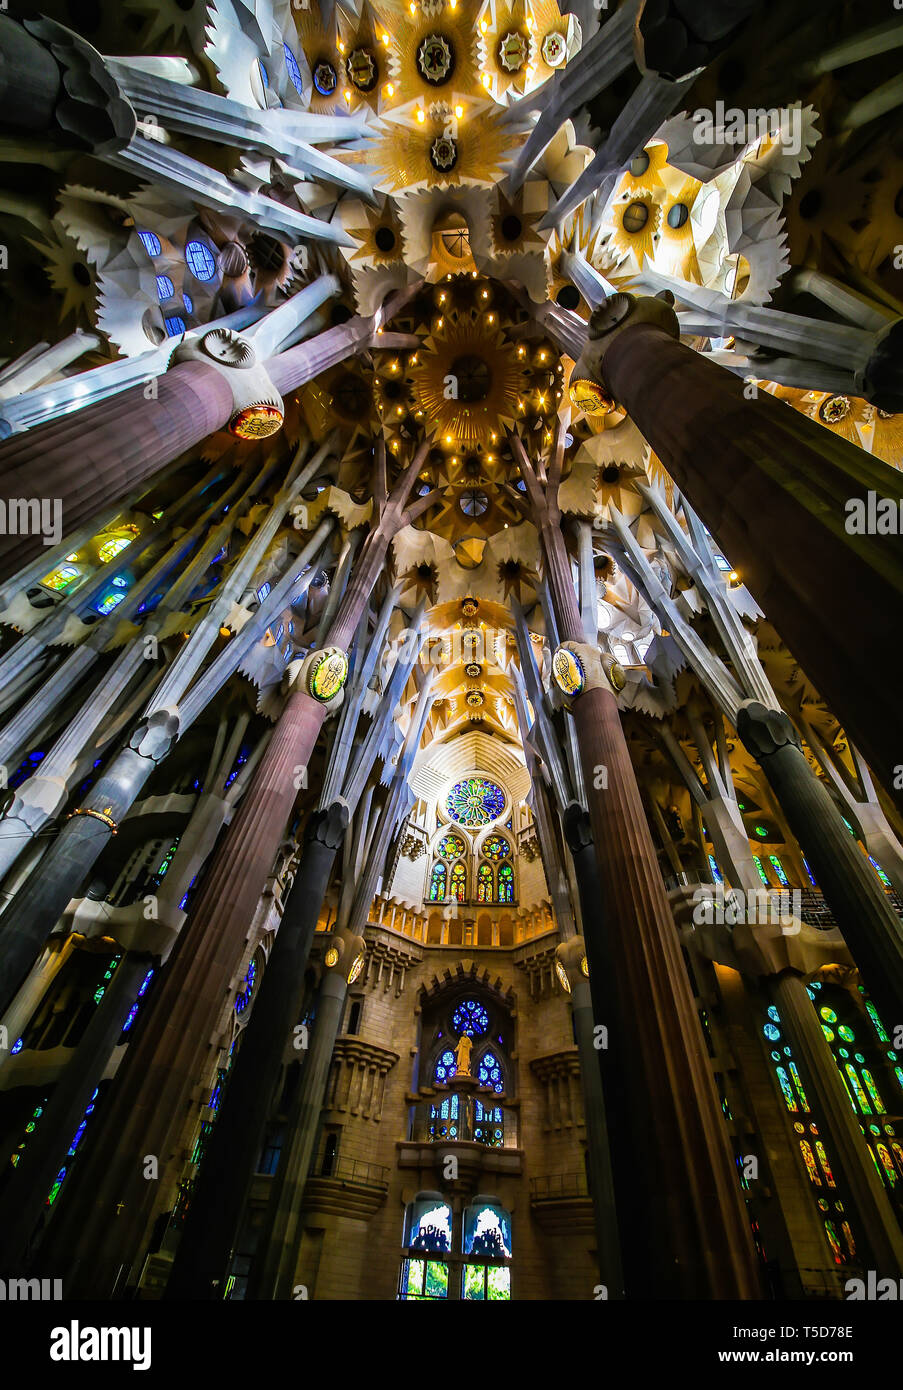 Barselona, Spain,November 14, 2017. The Basilica redemptive Temple of the Holy family Sagrada by  Antonio Gaudi from the inside Stock Photo